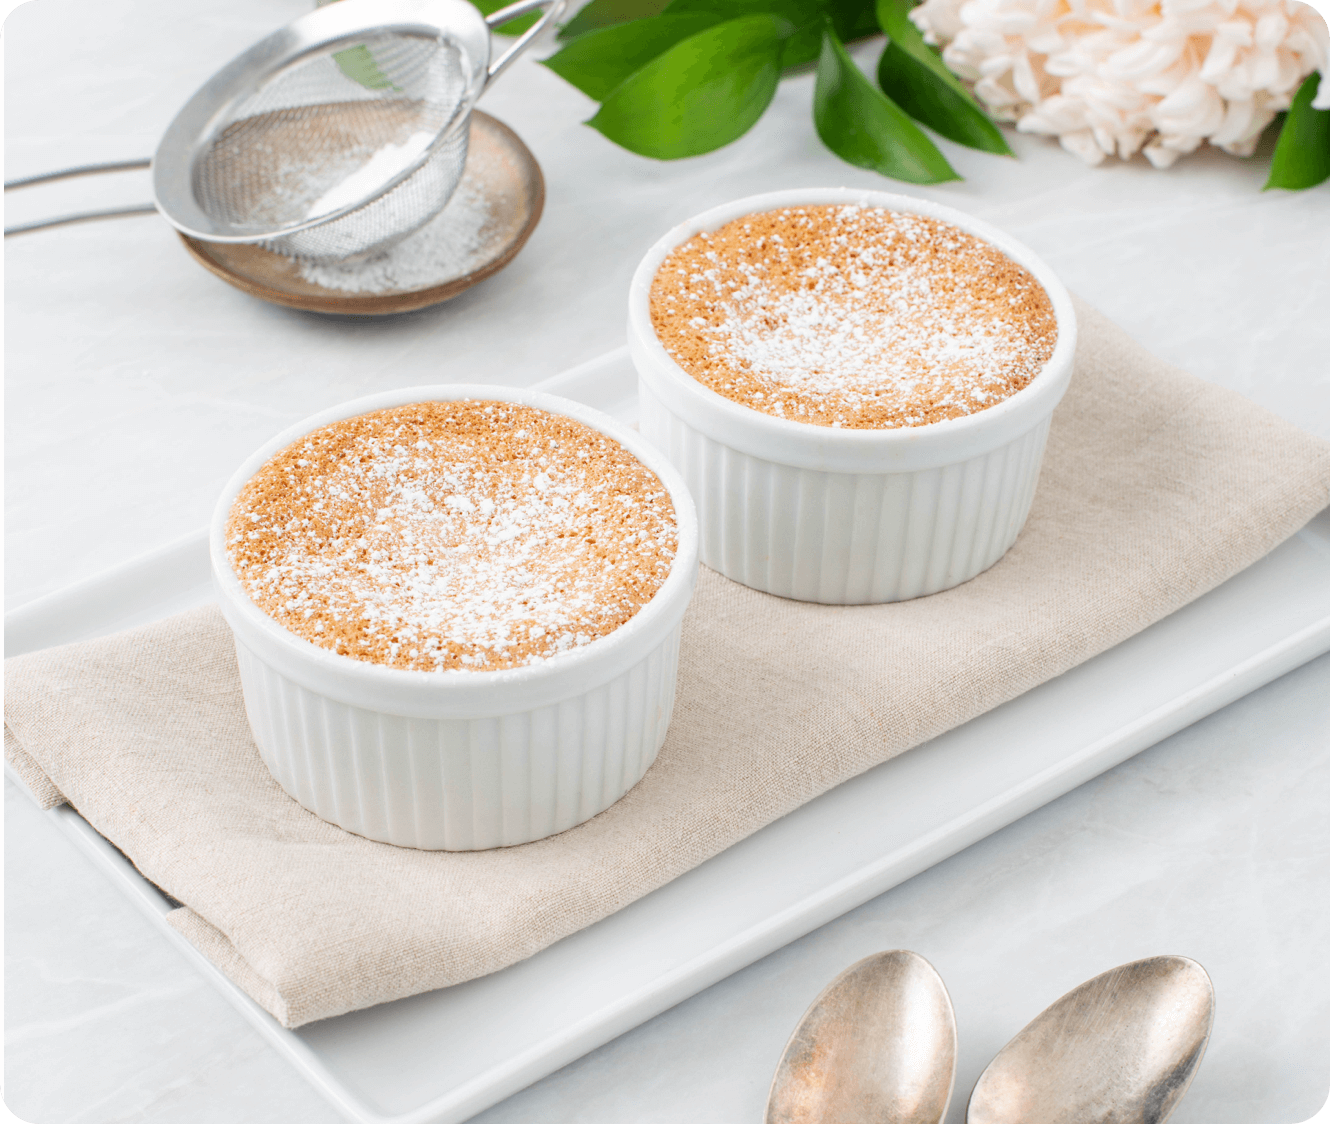 Baked Almond Fruit Pudding